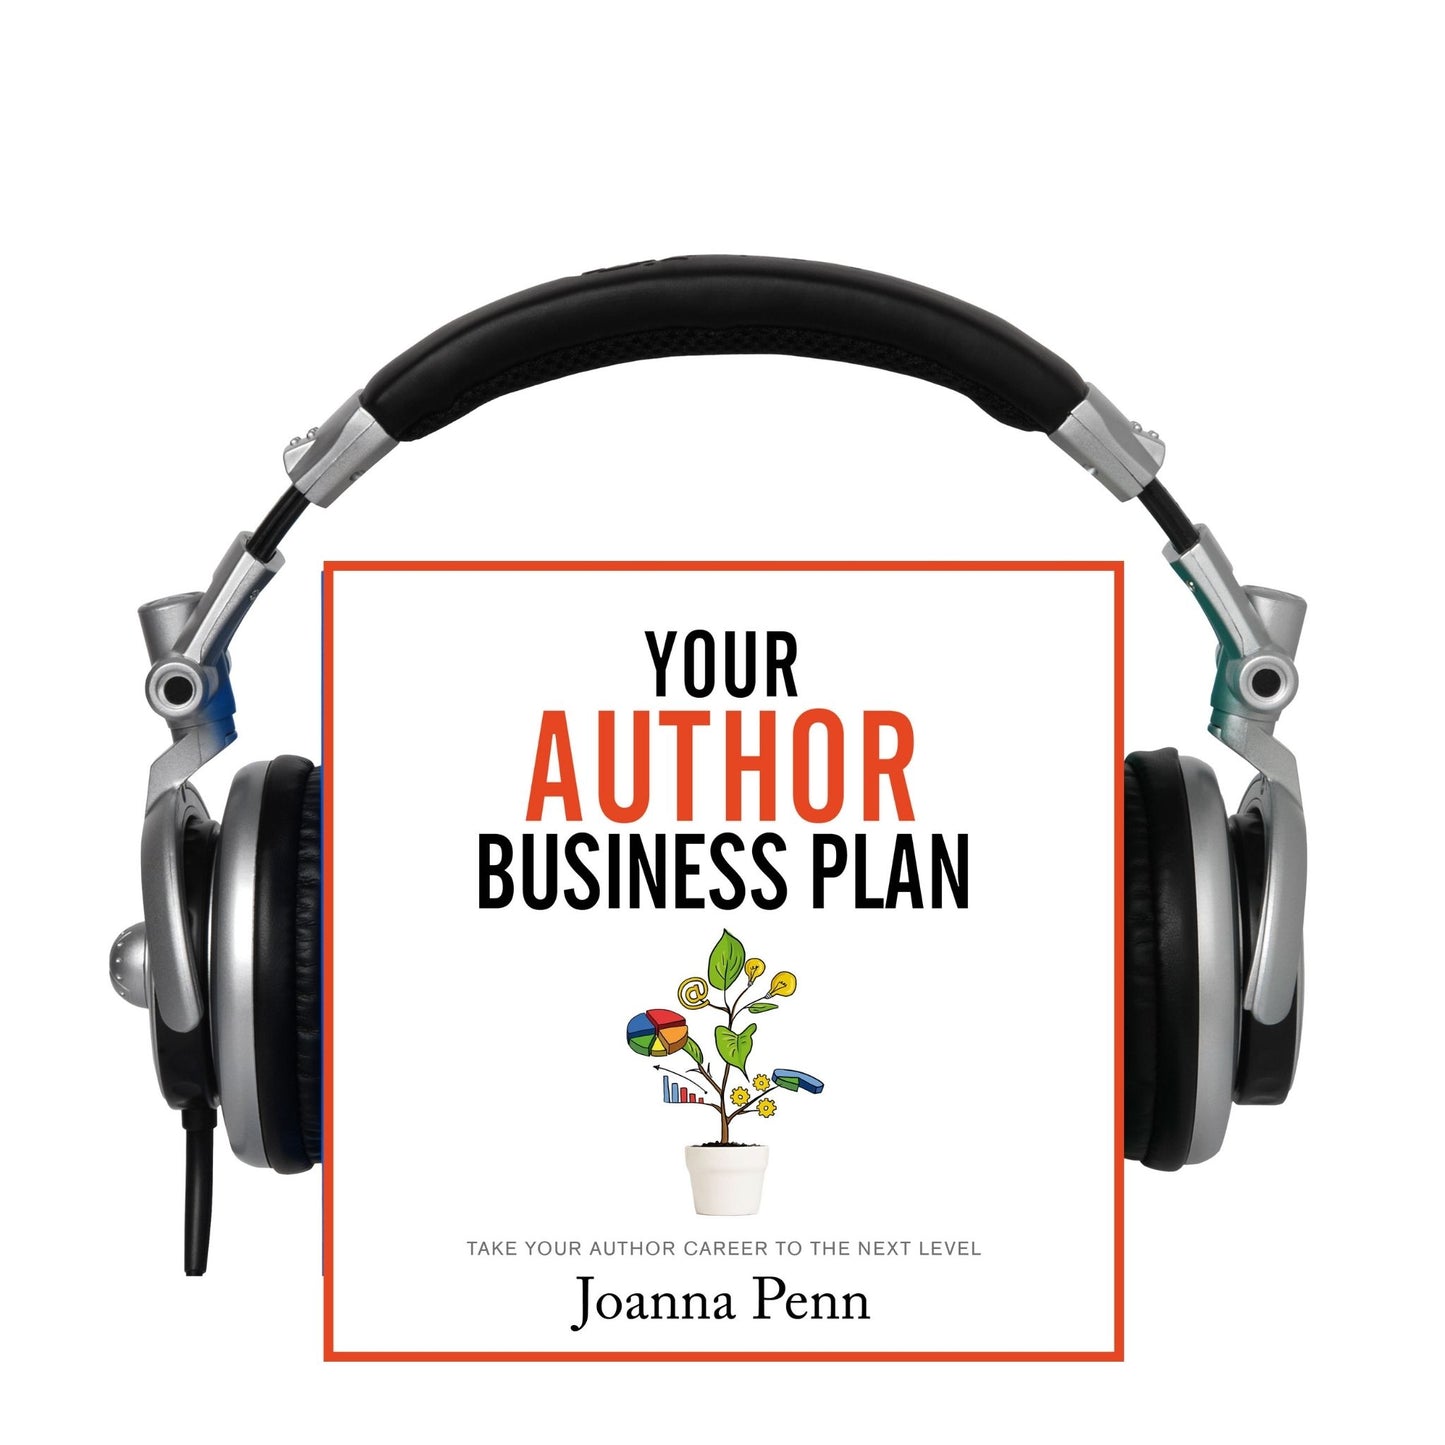 Your Author Business Plan Audiobook, Narrated by Joanna Penn